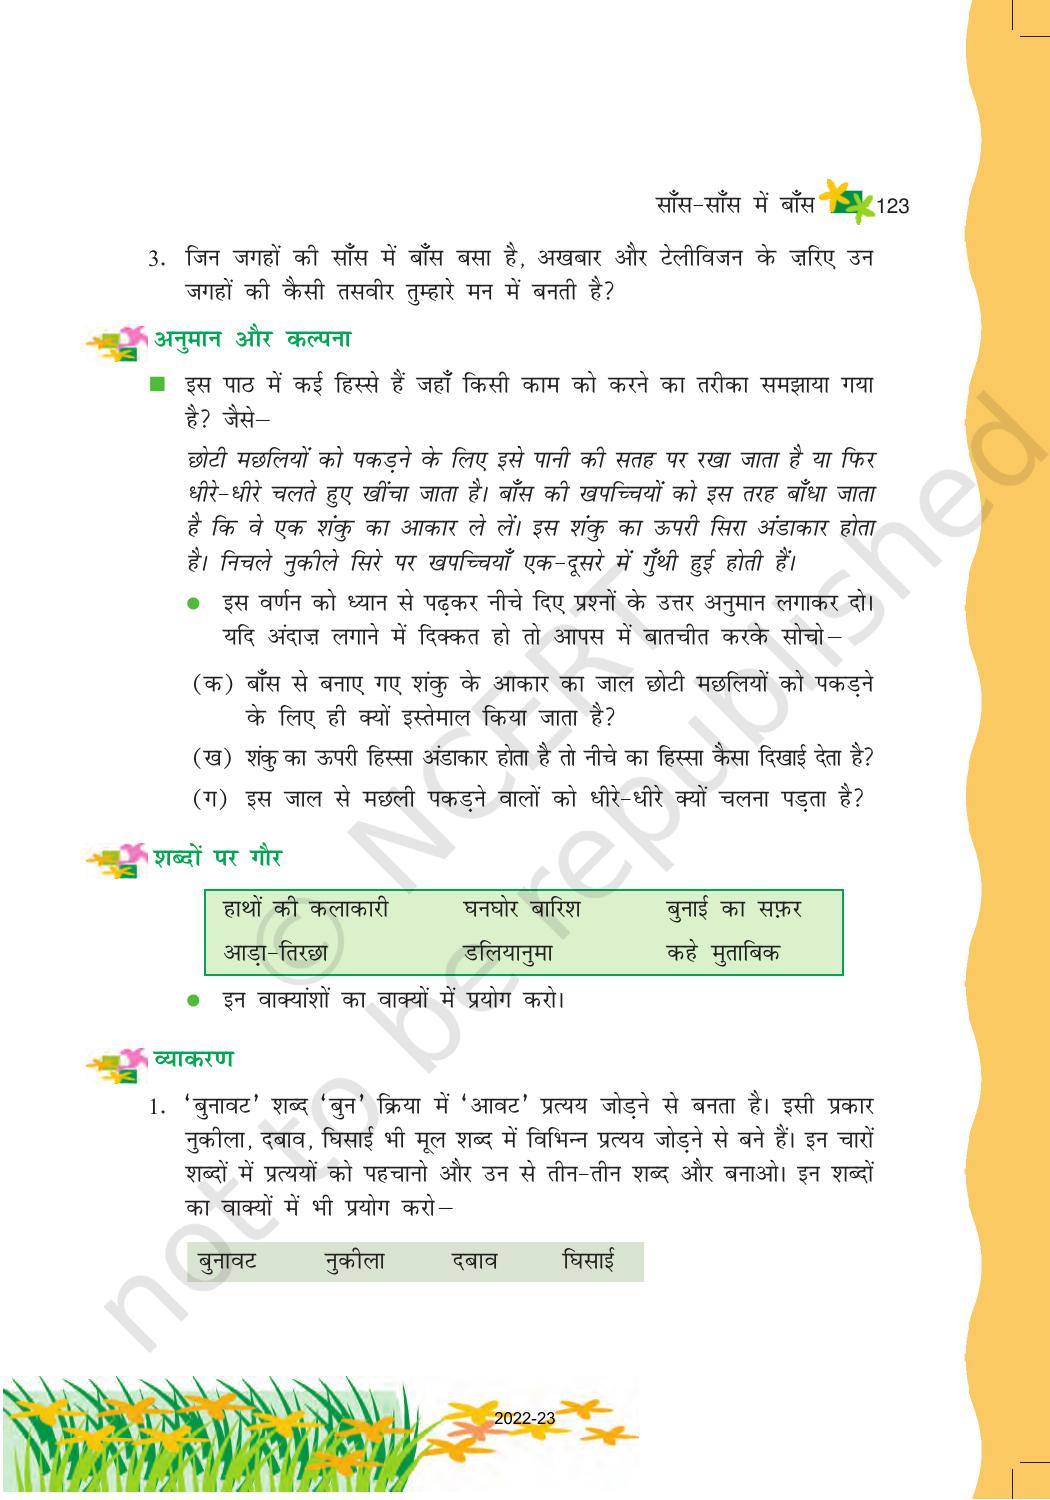 NCERT Book for Class 6 Hindi(Vasant Bhag 1) : Chapter 17-साँस – साँस में बांस - Page 6